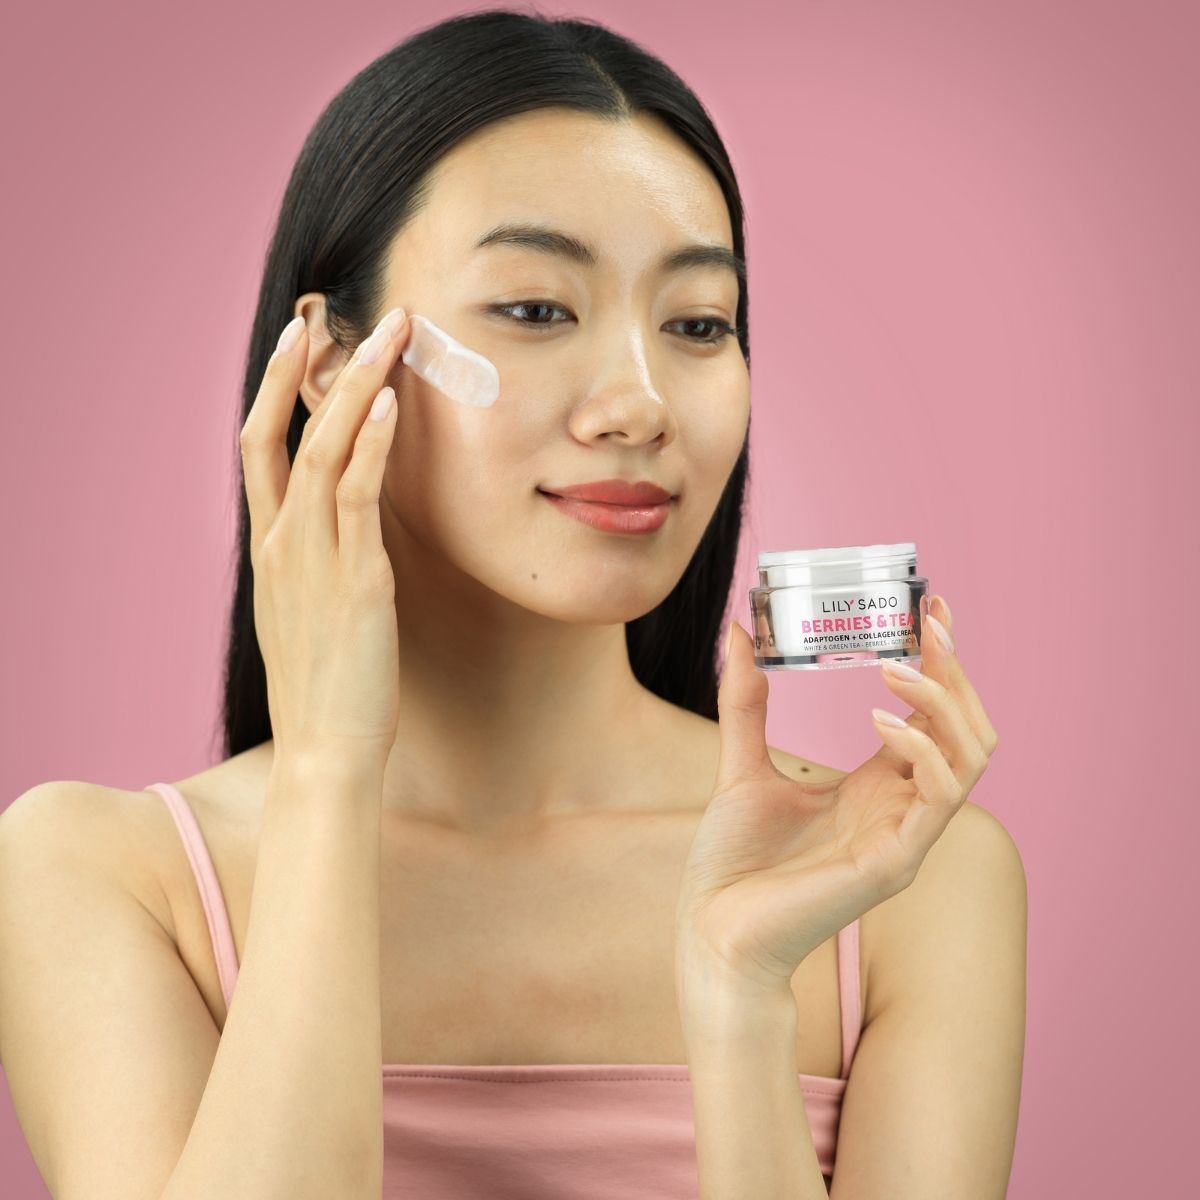 Asian model with cosmetics on a pink background showing the product